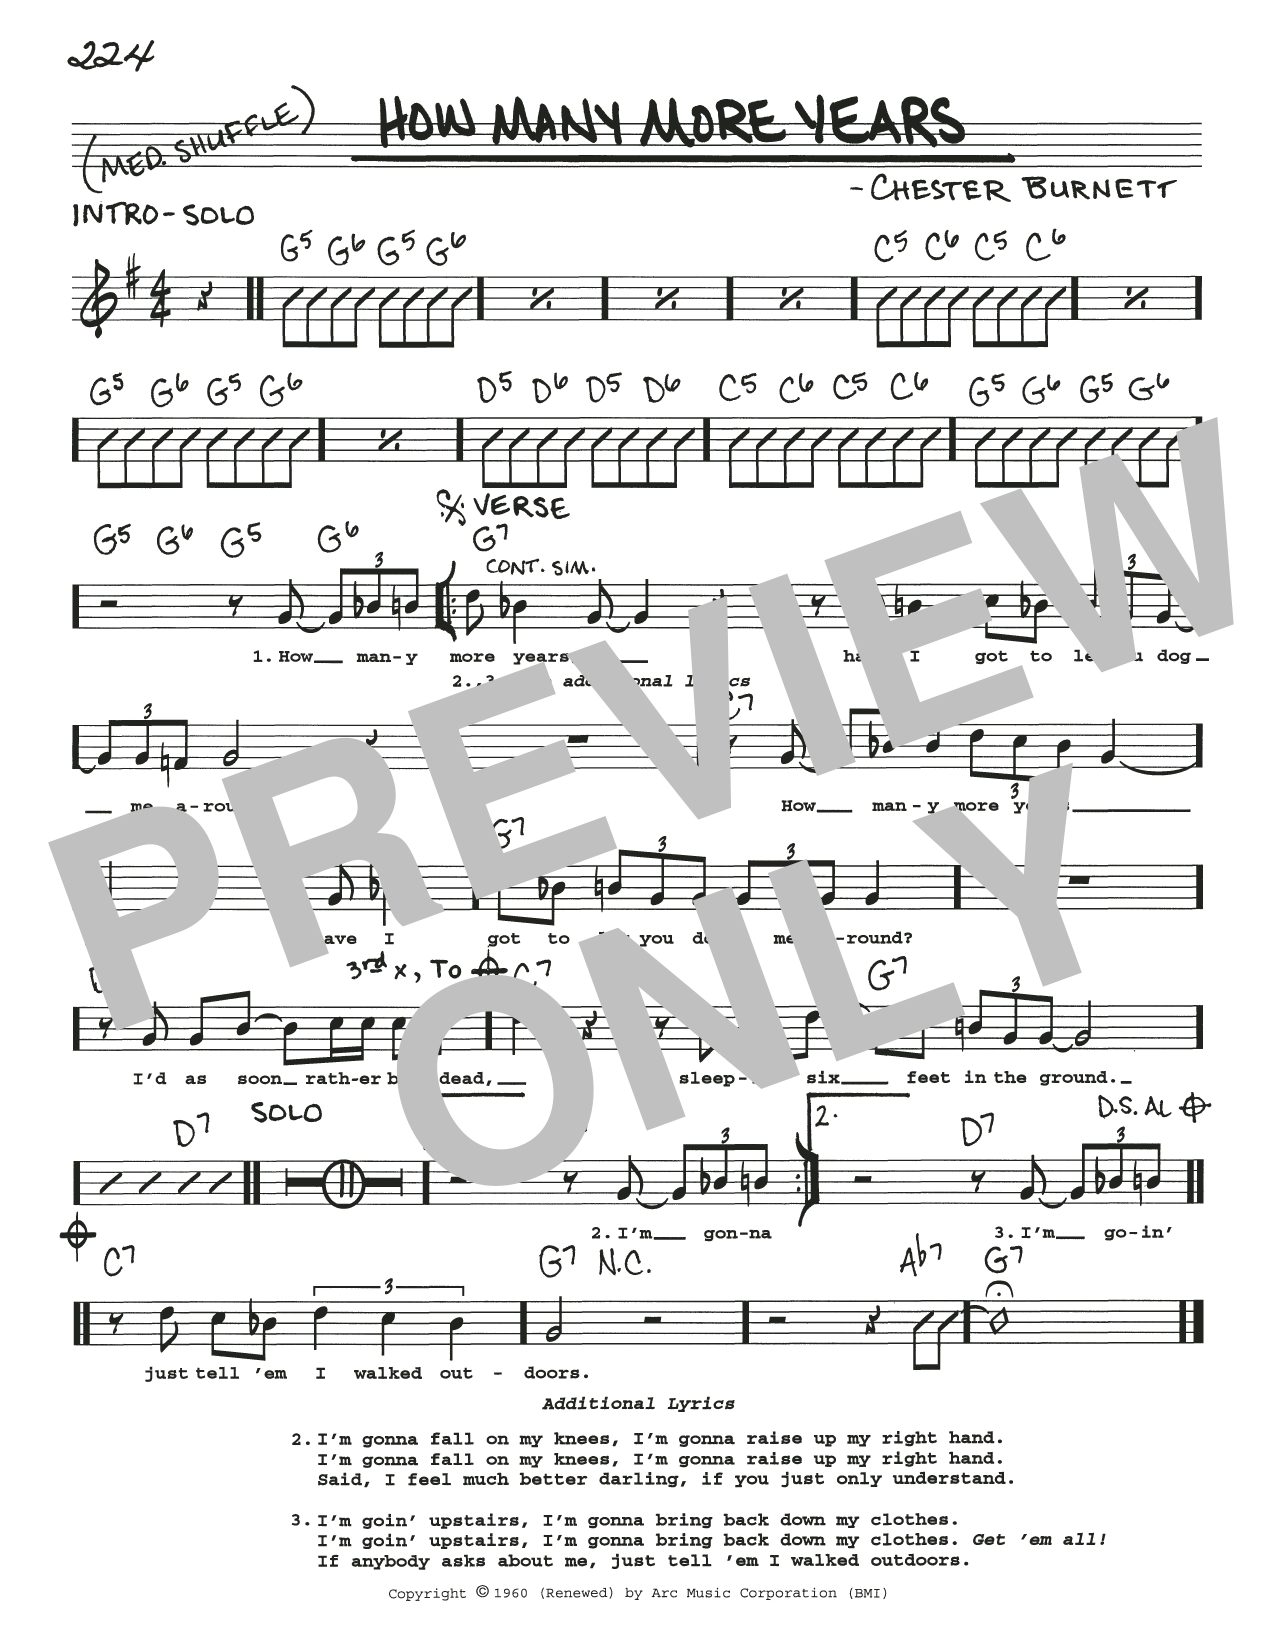 Download Howlin' Wolf How Many More Years Sheet Music